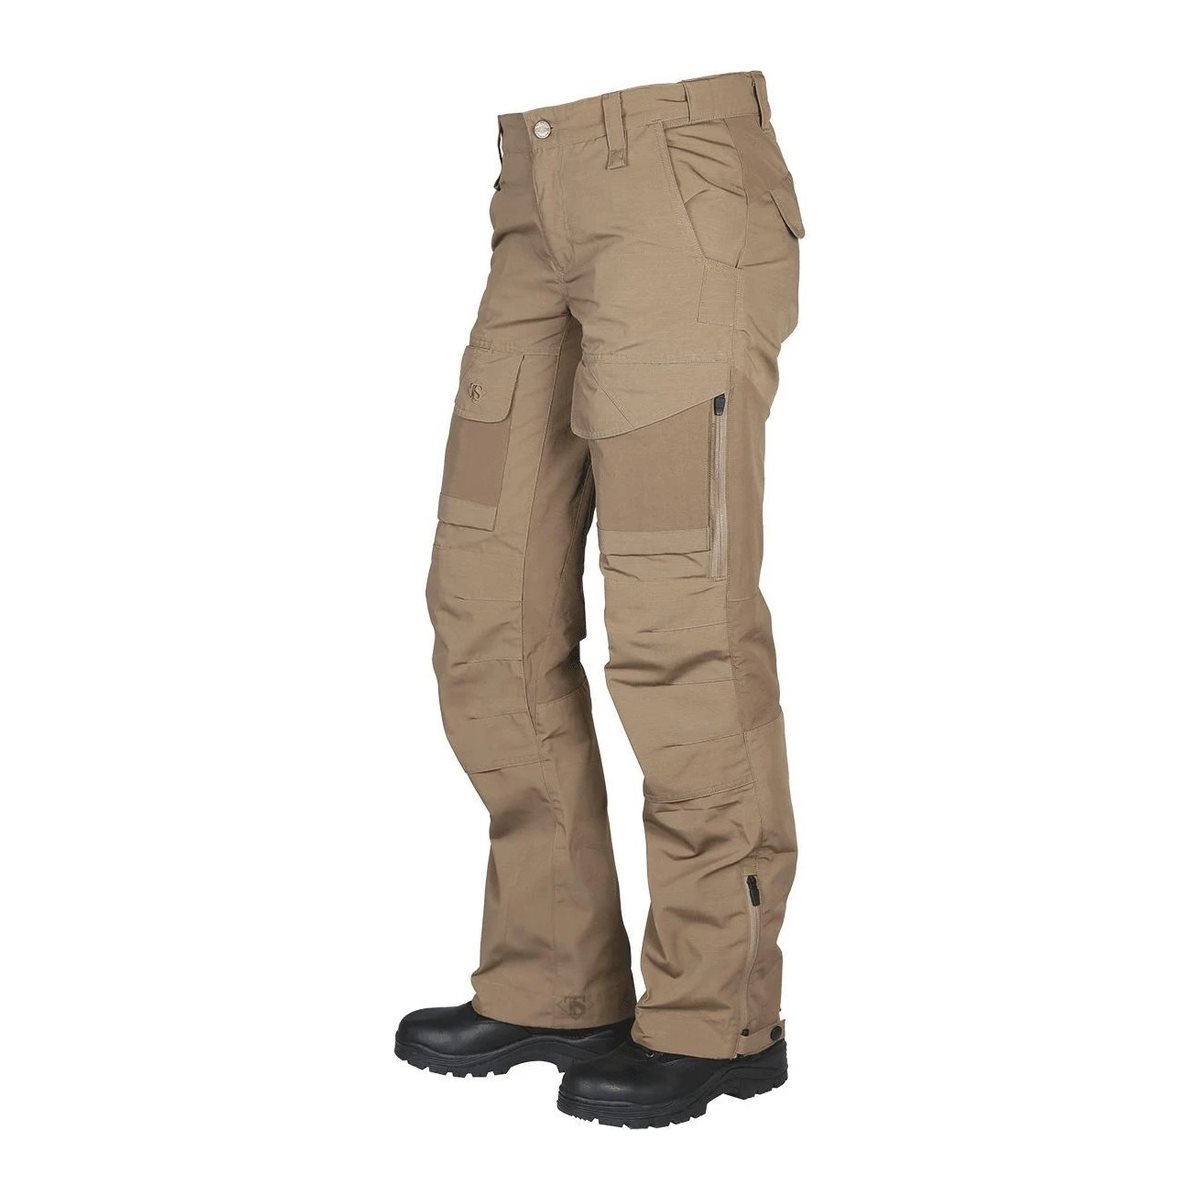 TRU-SPEC 1063027 24-7 Poly Cotton Ripstop Trousers Coyote W38 L34 for sale online 